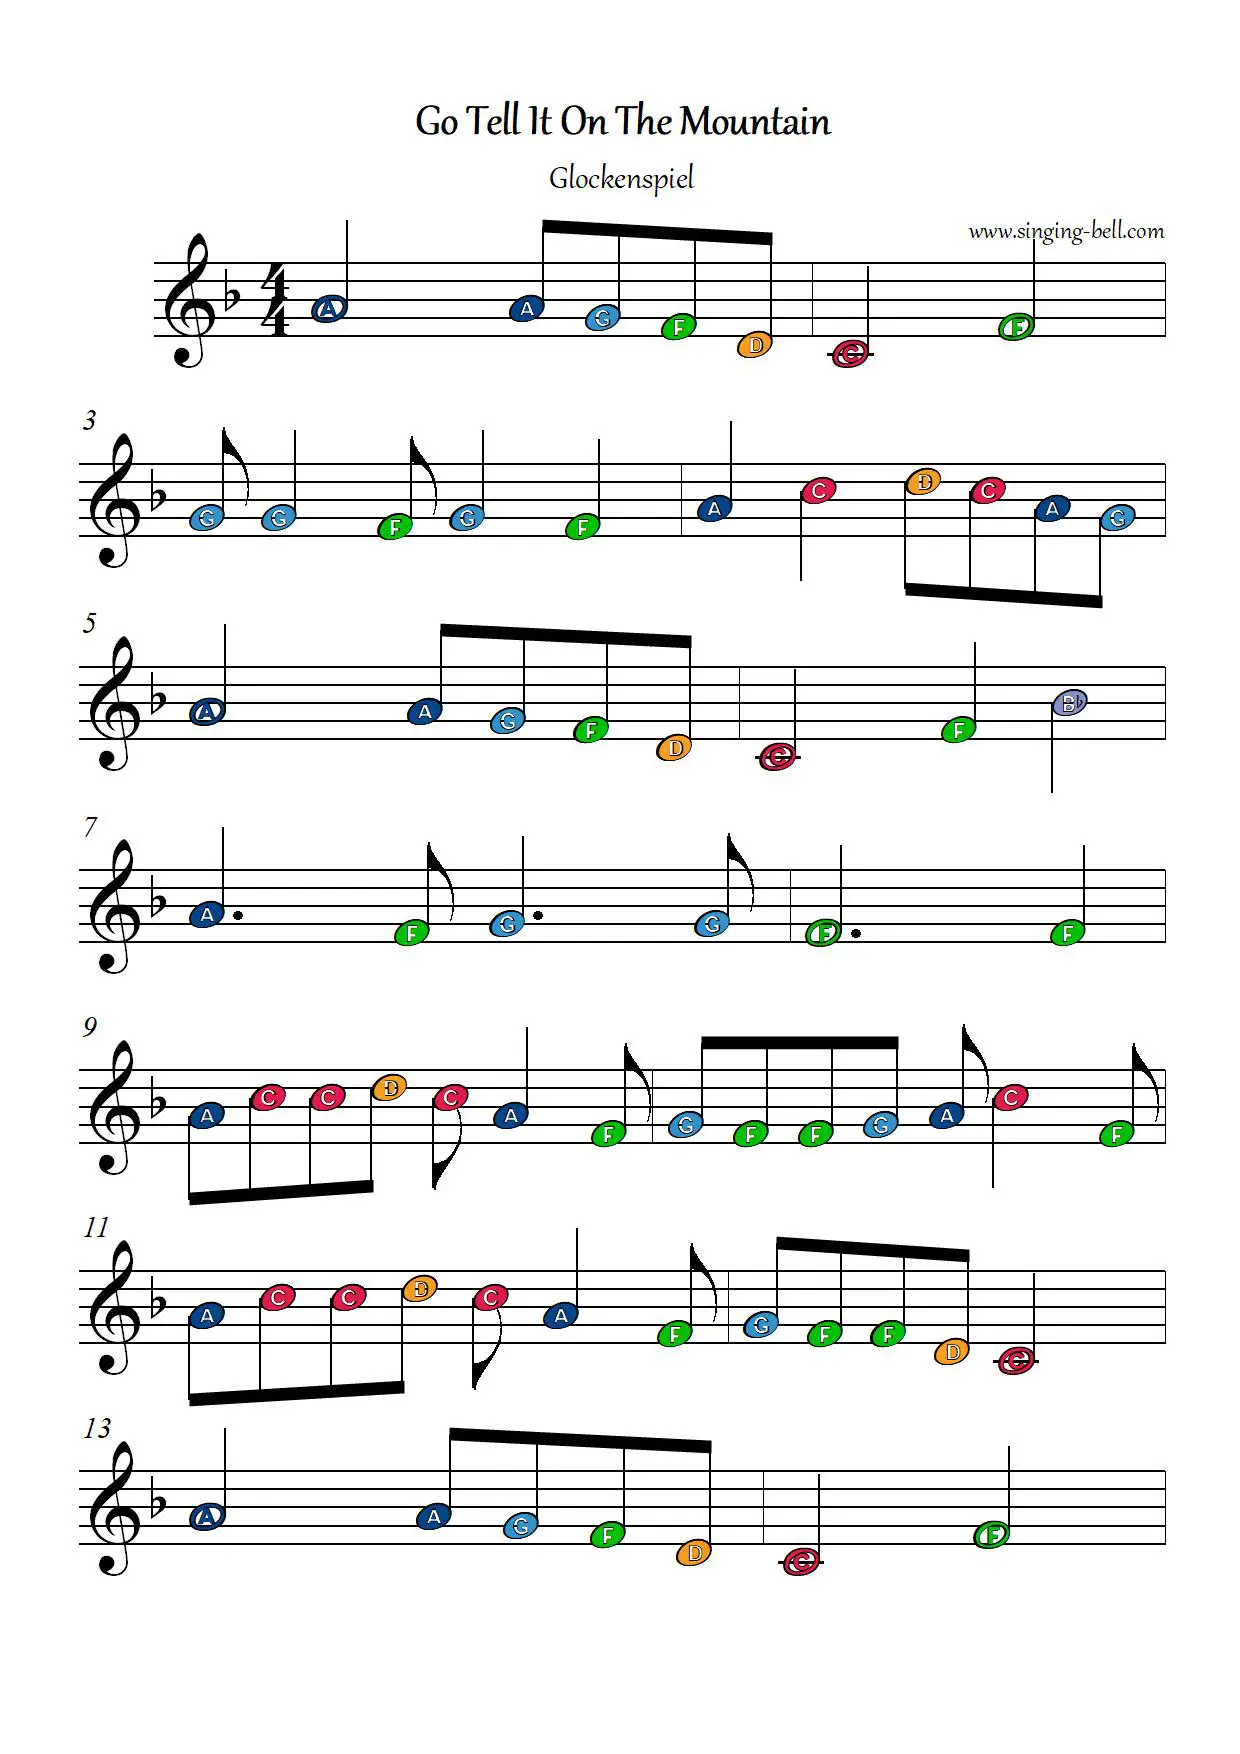 GoTell It On The Mountain free xylophone glockenspiel sheet music color notes chart pdf p.1